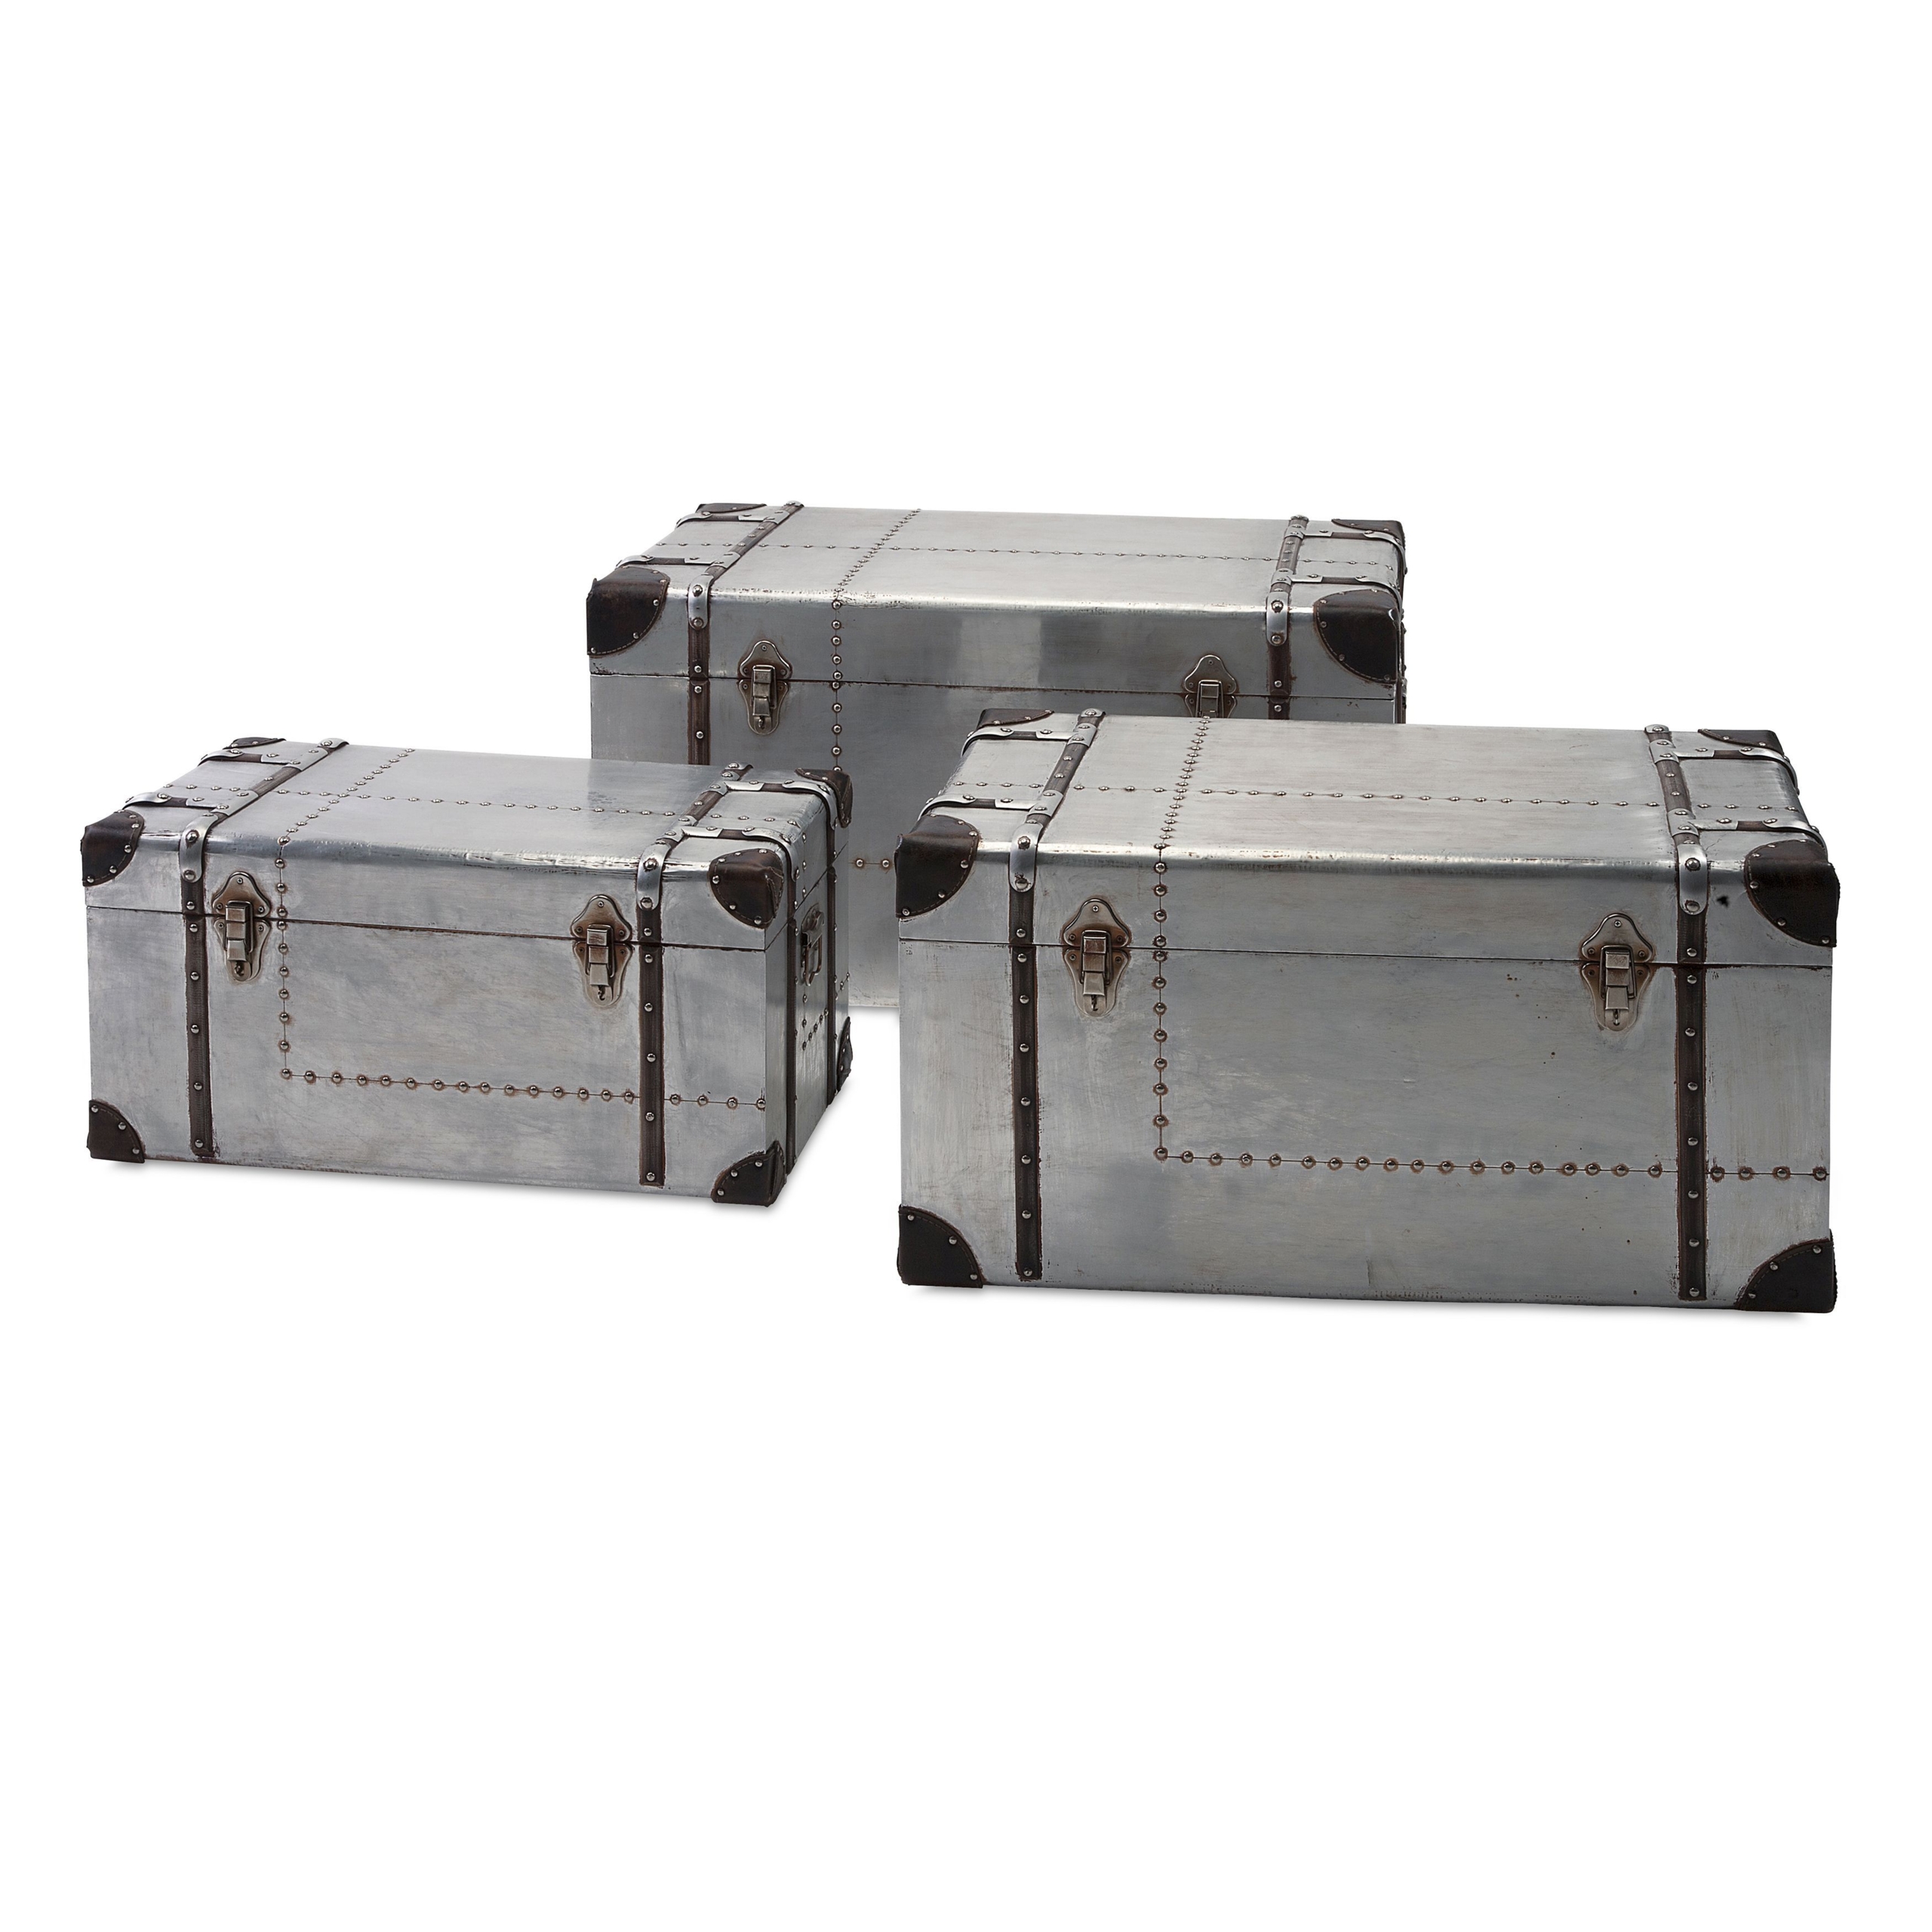 Set of 3 Denali Aviator Aluminum Storage Trunks with Faux Leather and Rivet Accents 32.35"